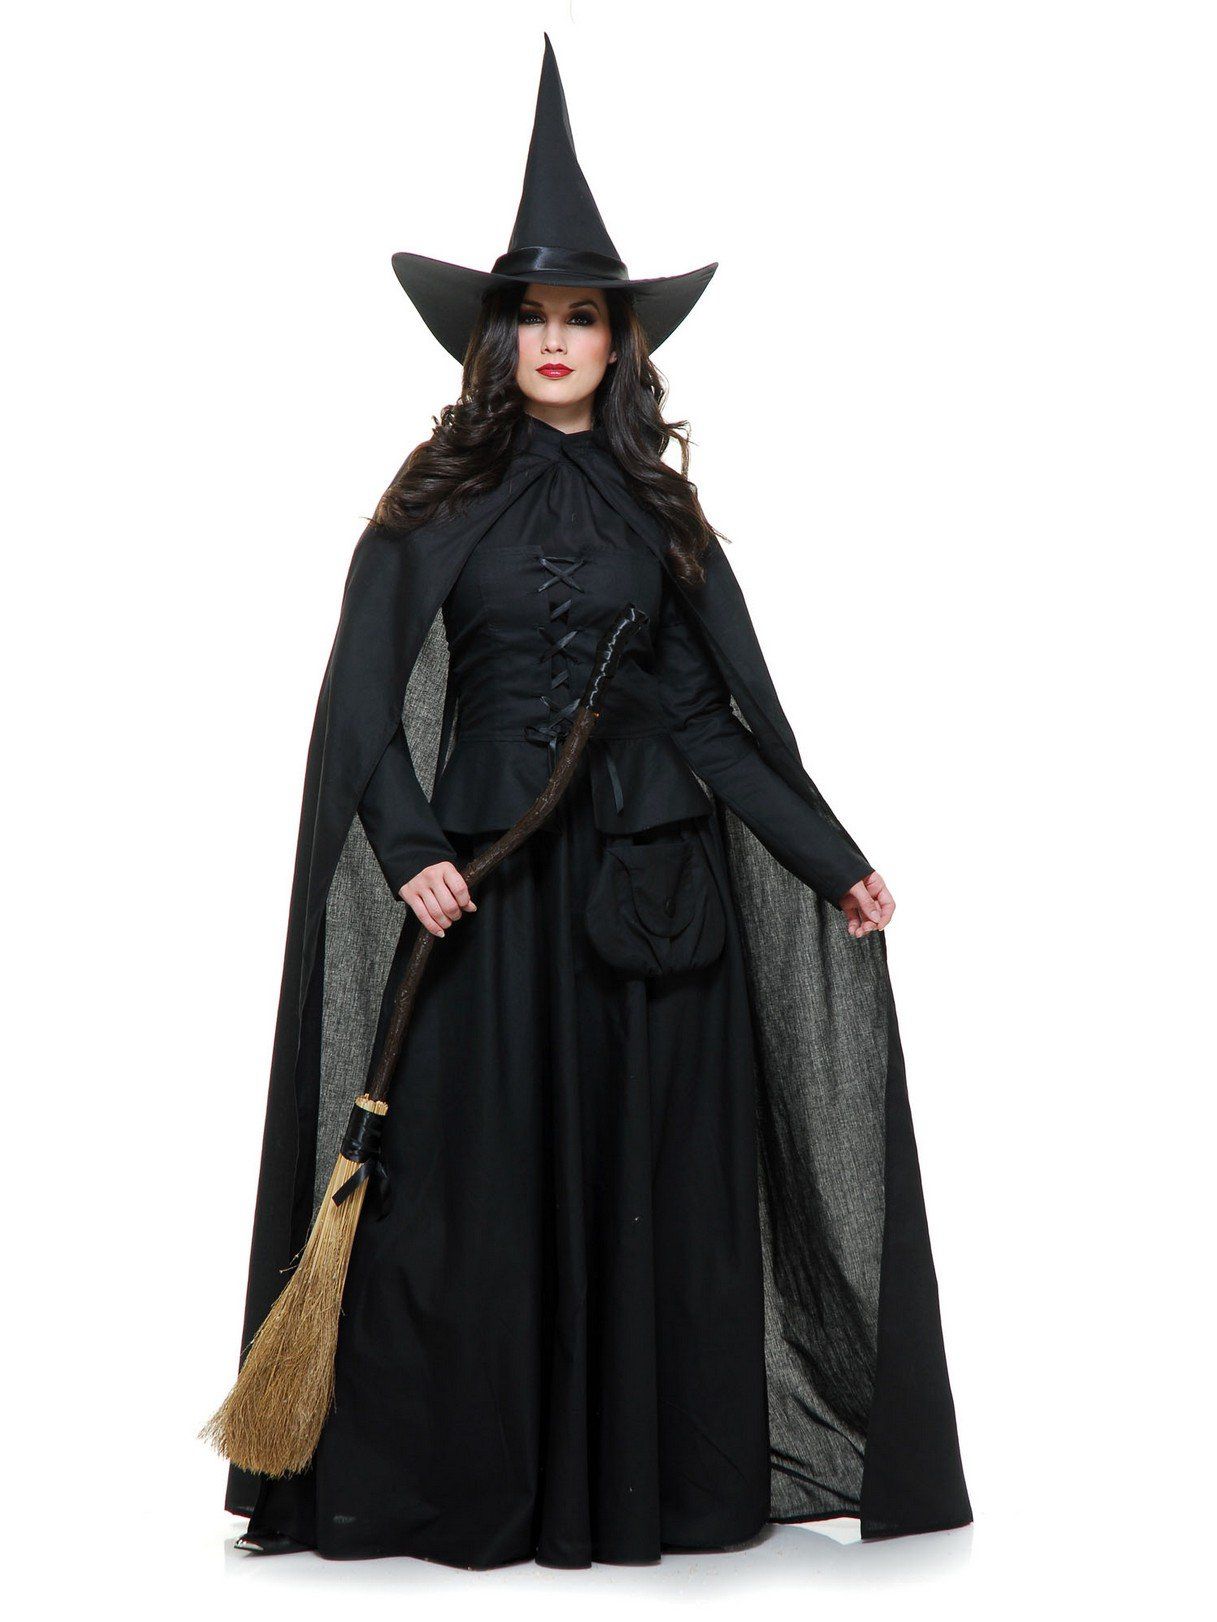 Adult Wicked Witch Costume - costumes.com